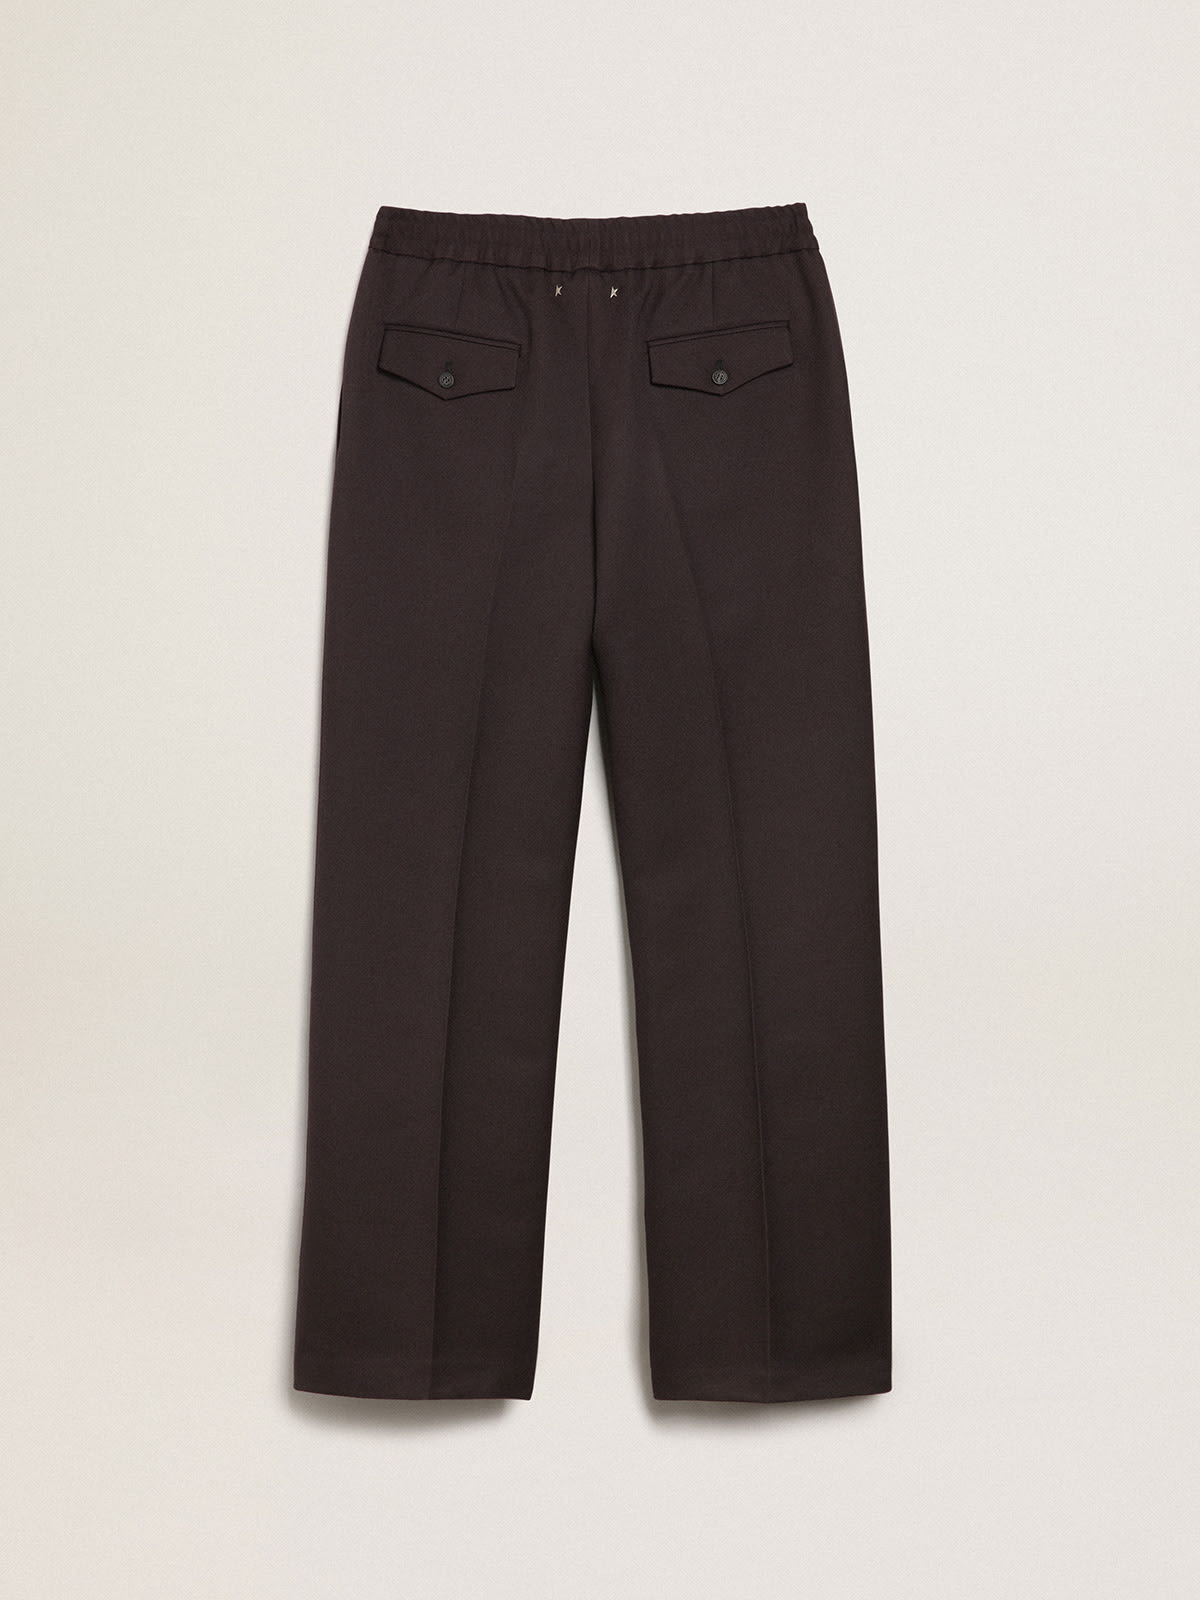 Golden Goose - Licorice-colored Journey Collection wide-leg jogging pants in 